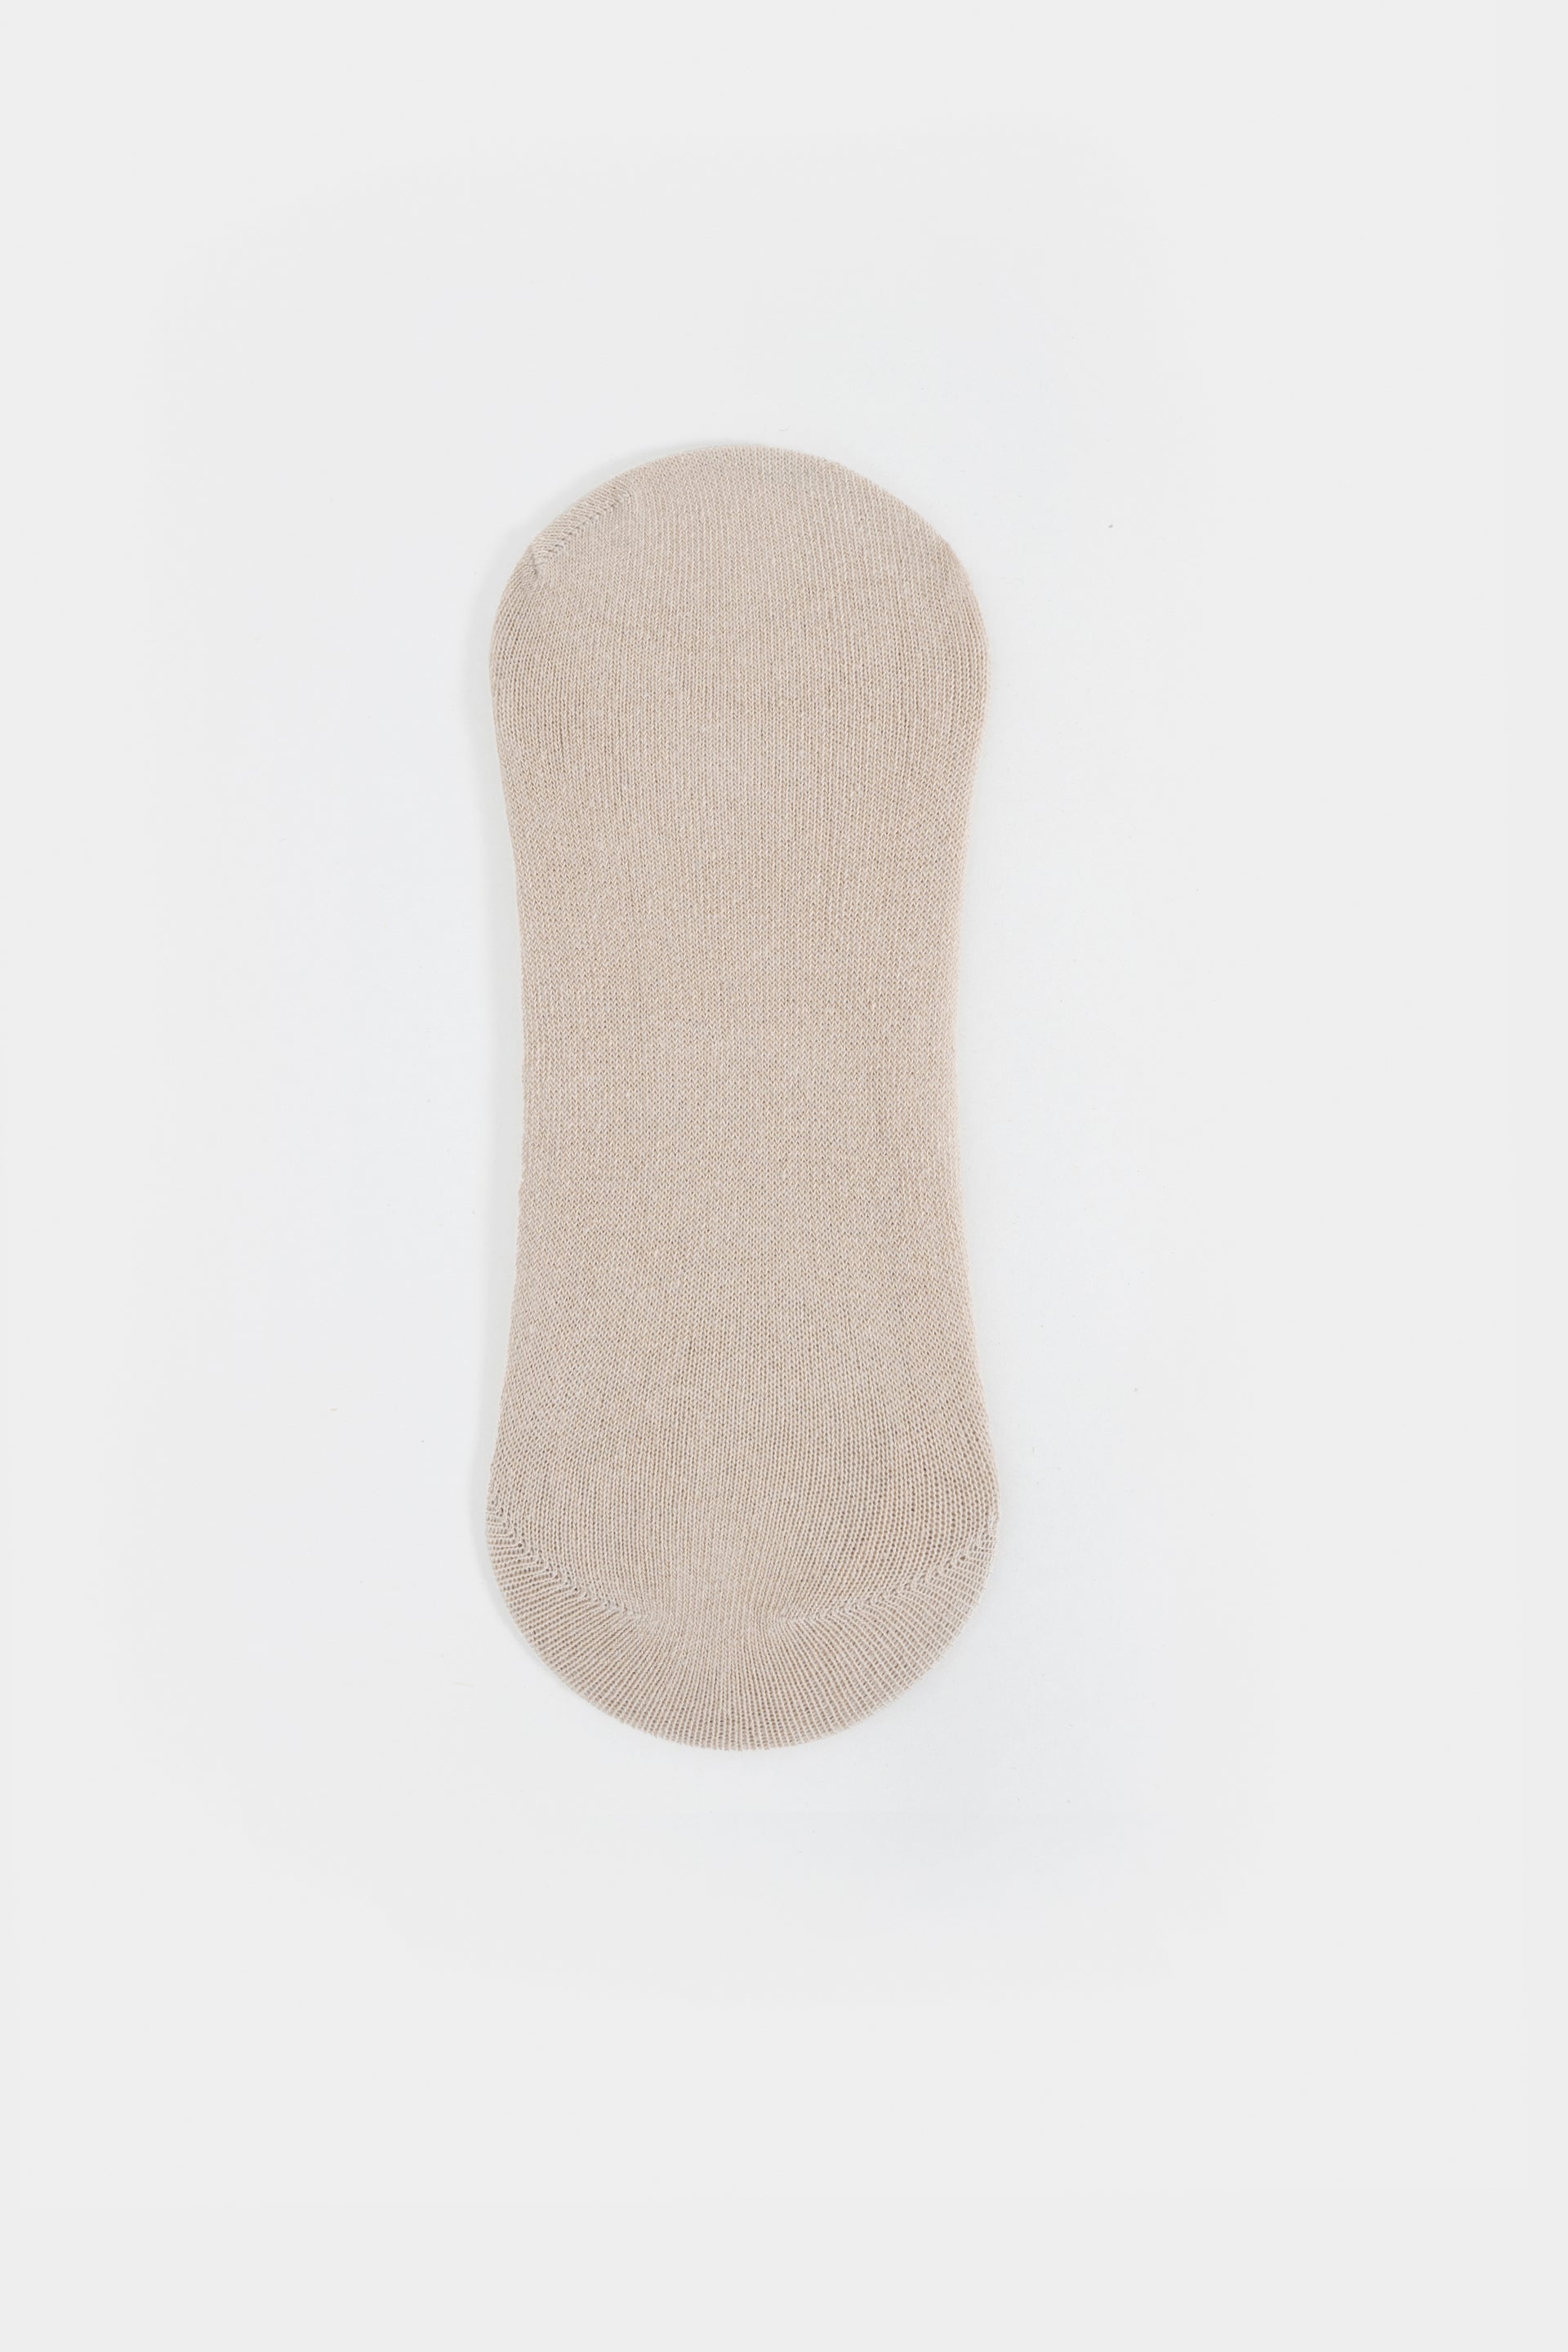 Pack of 3 Invisible Socks